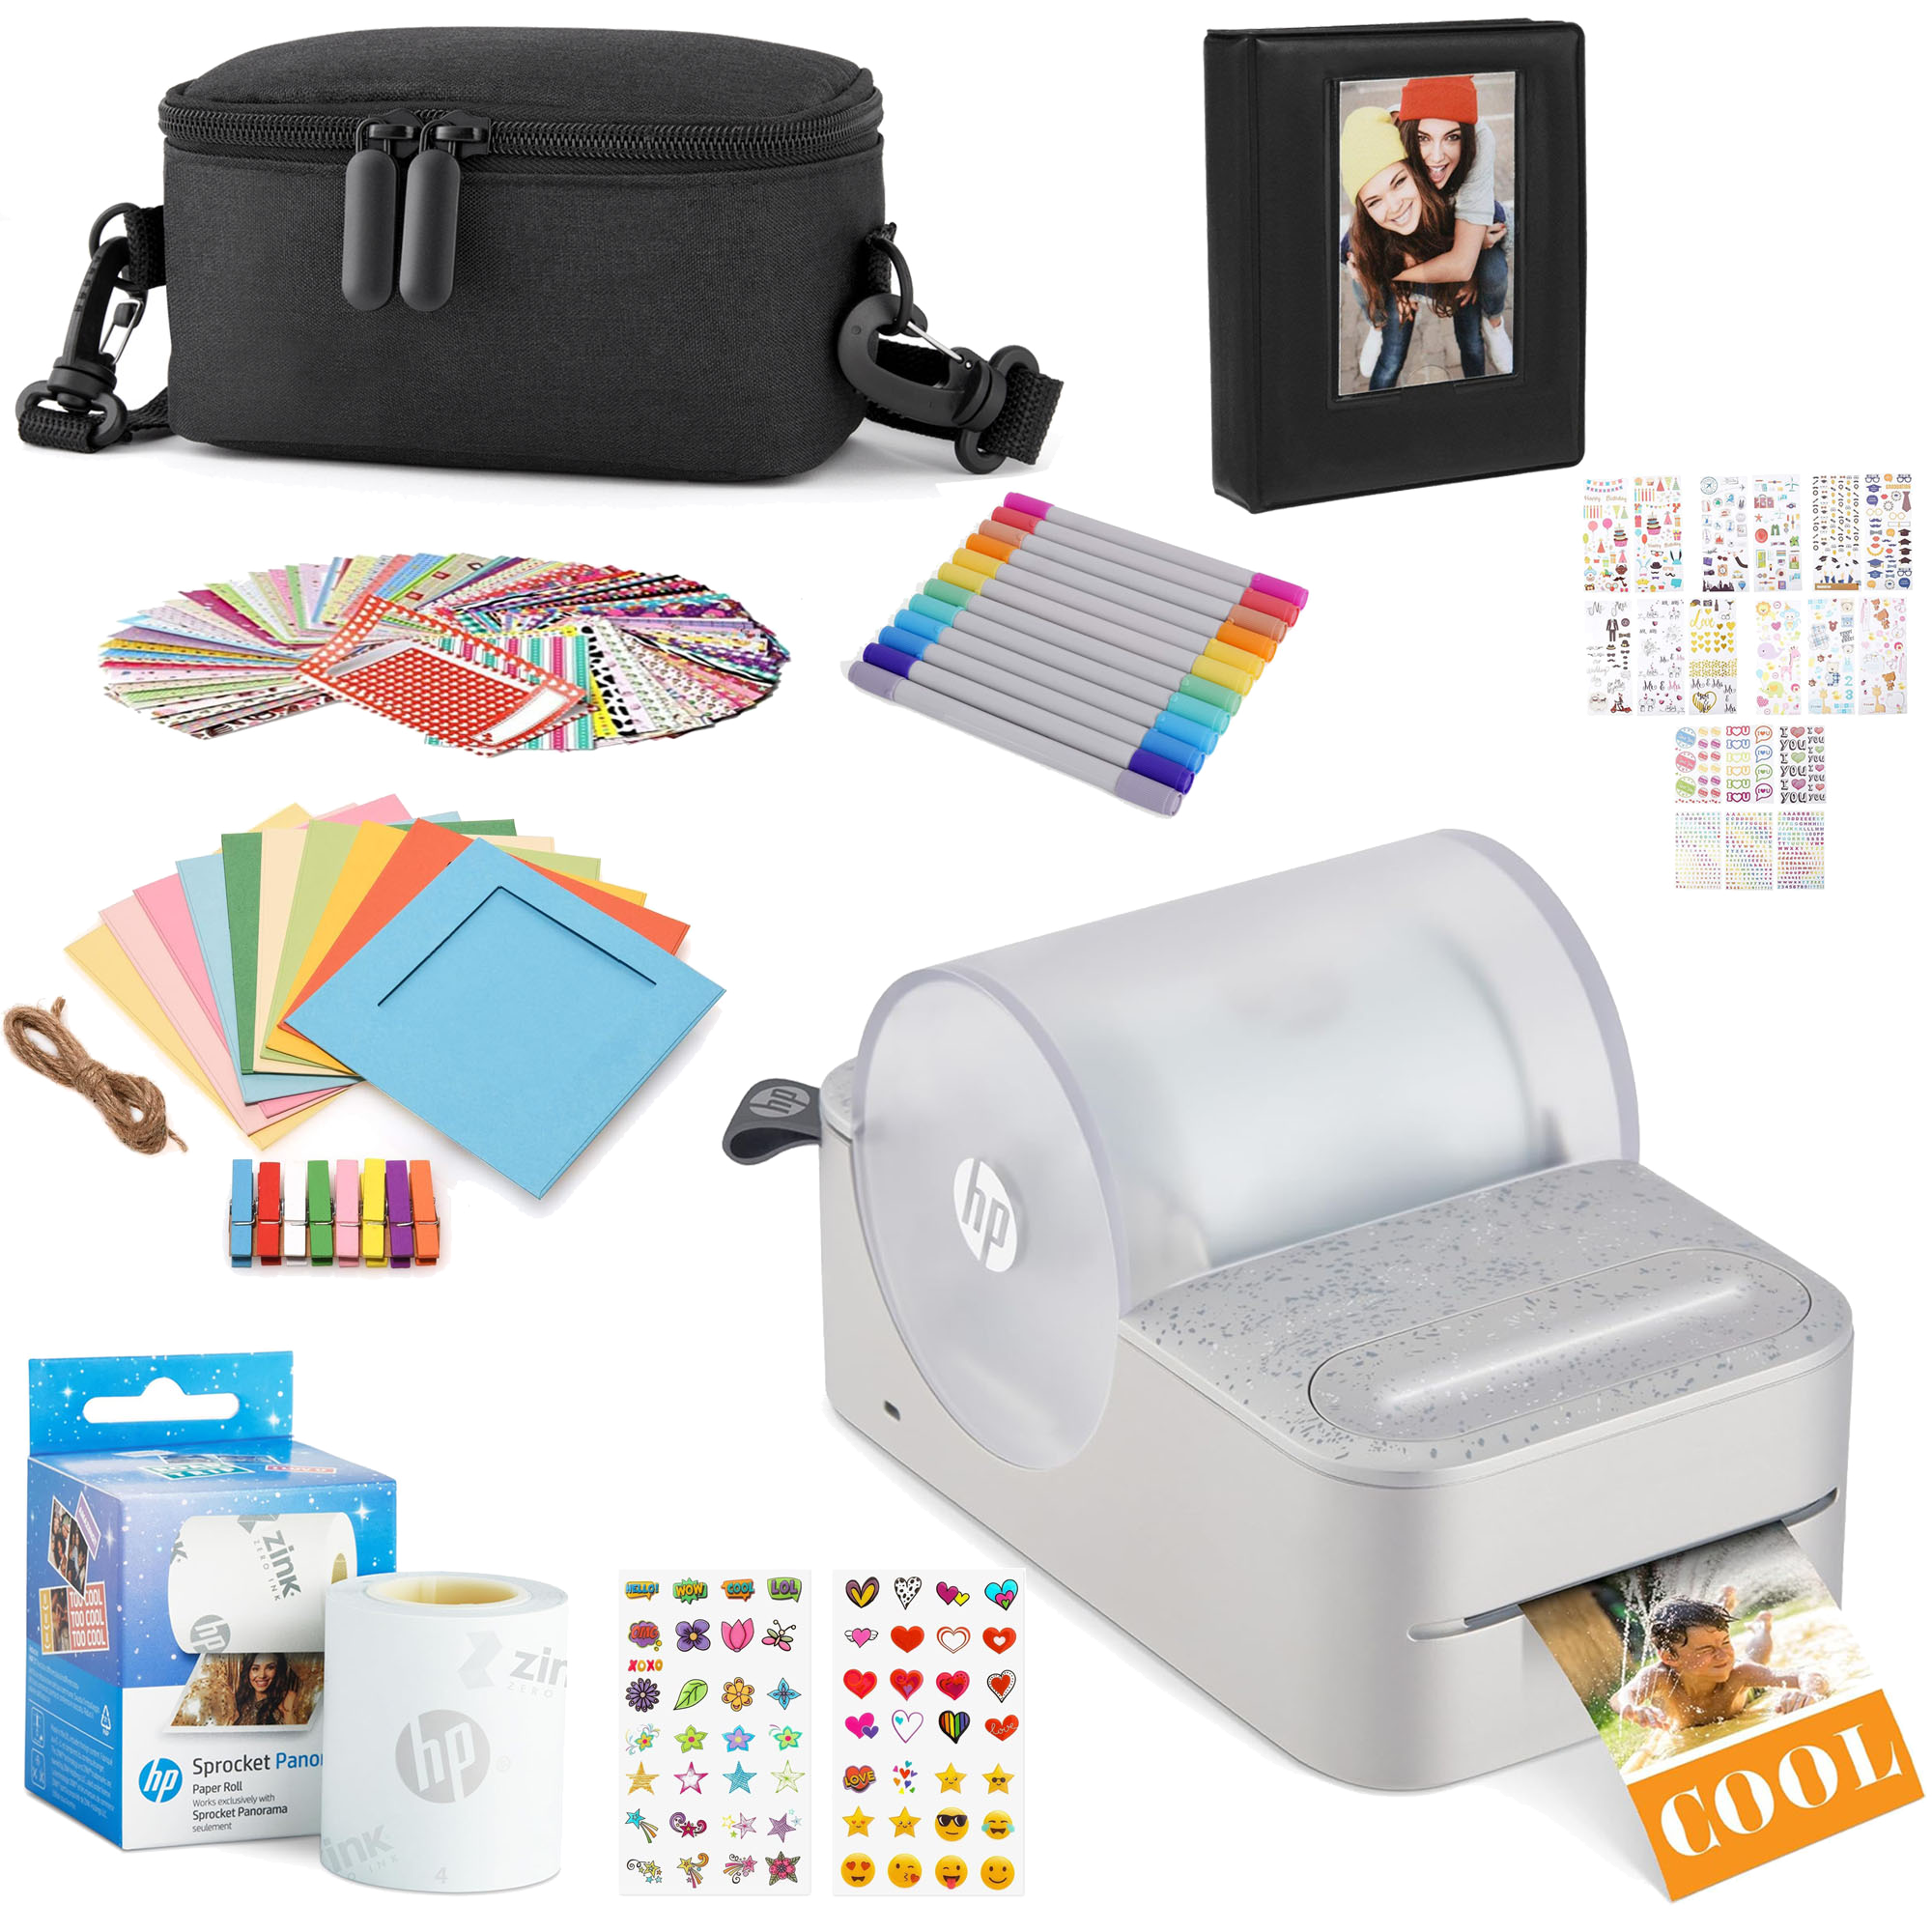 HP Sprocket Panorama Instant Portable Color Label & Photo Printer